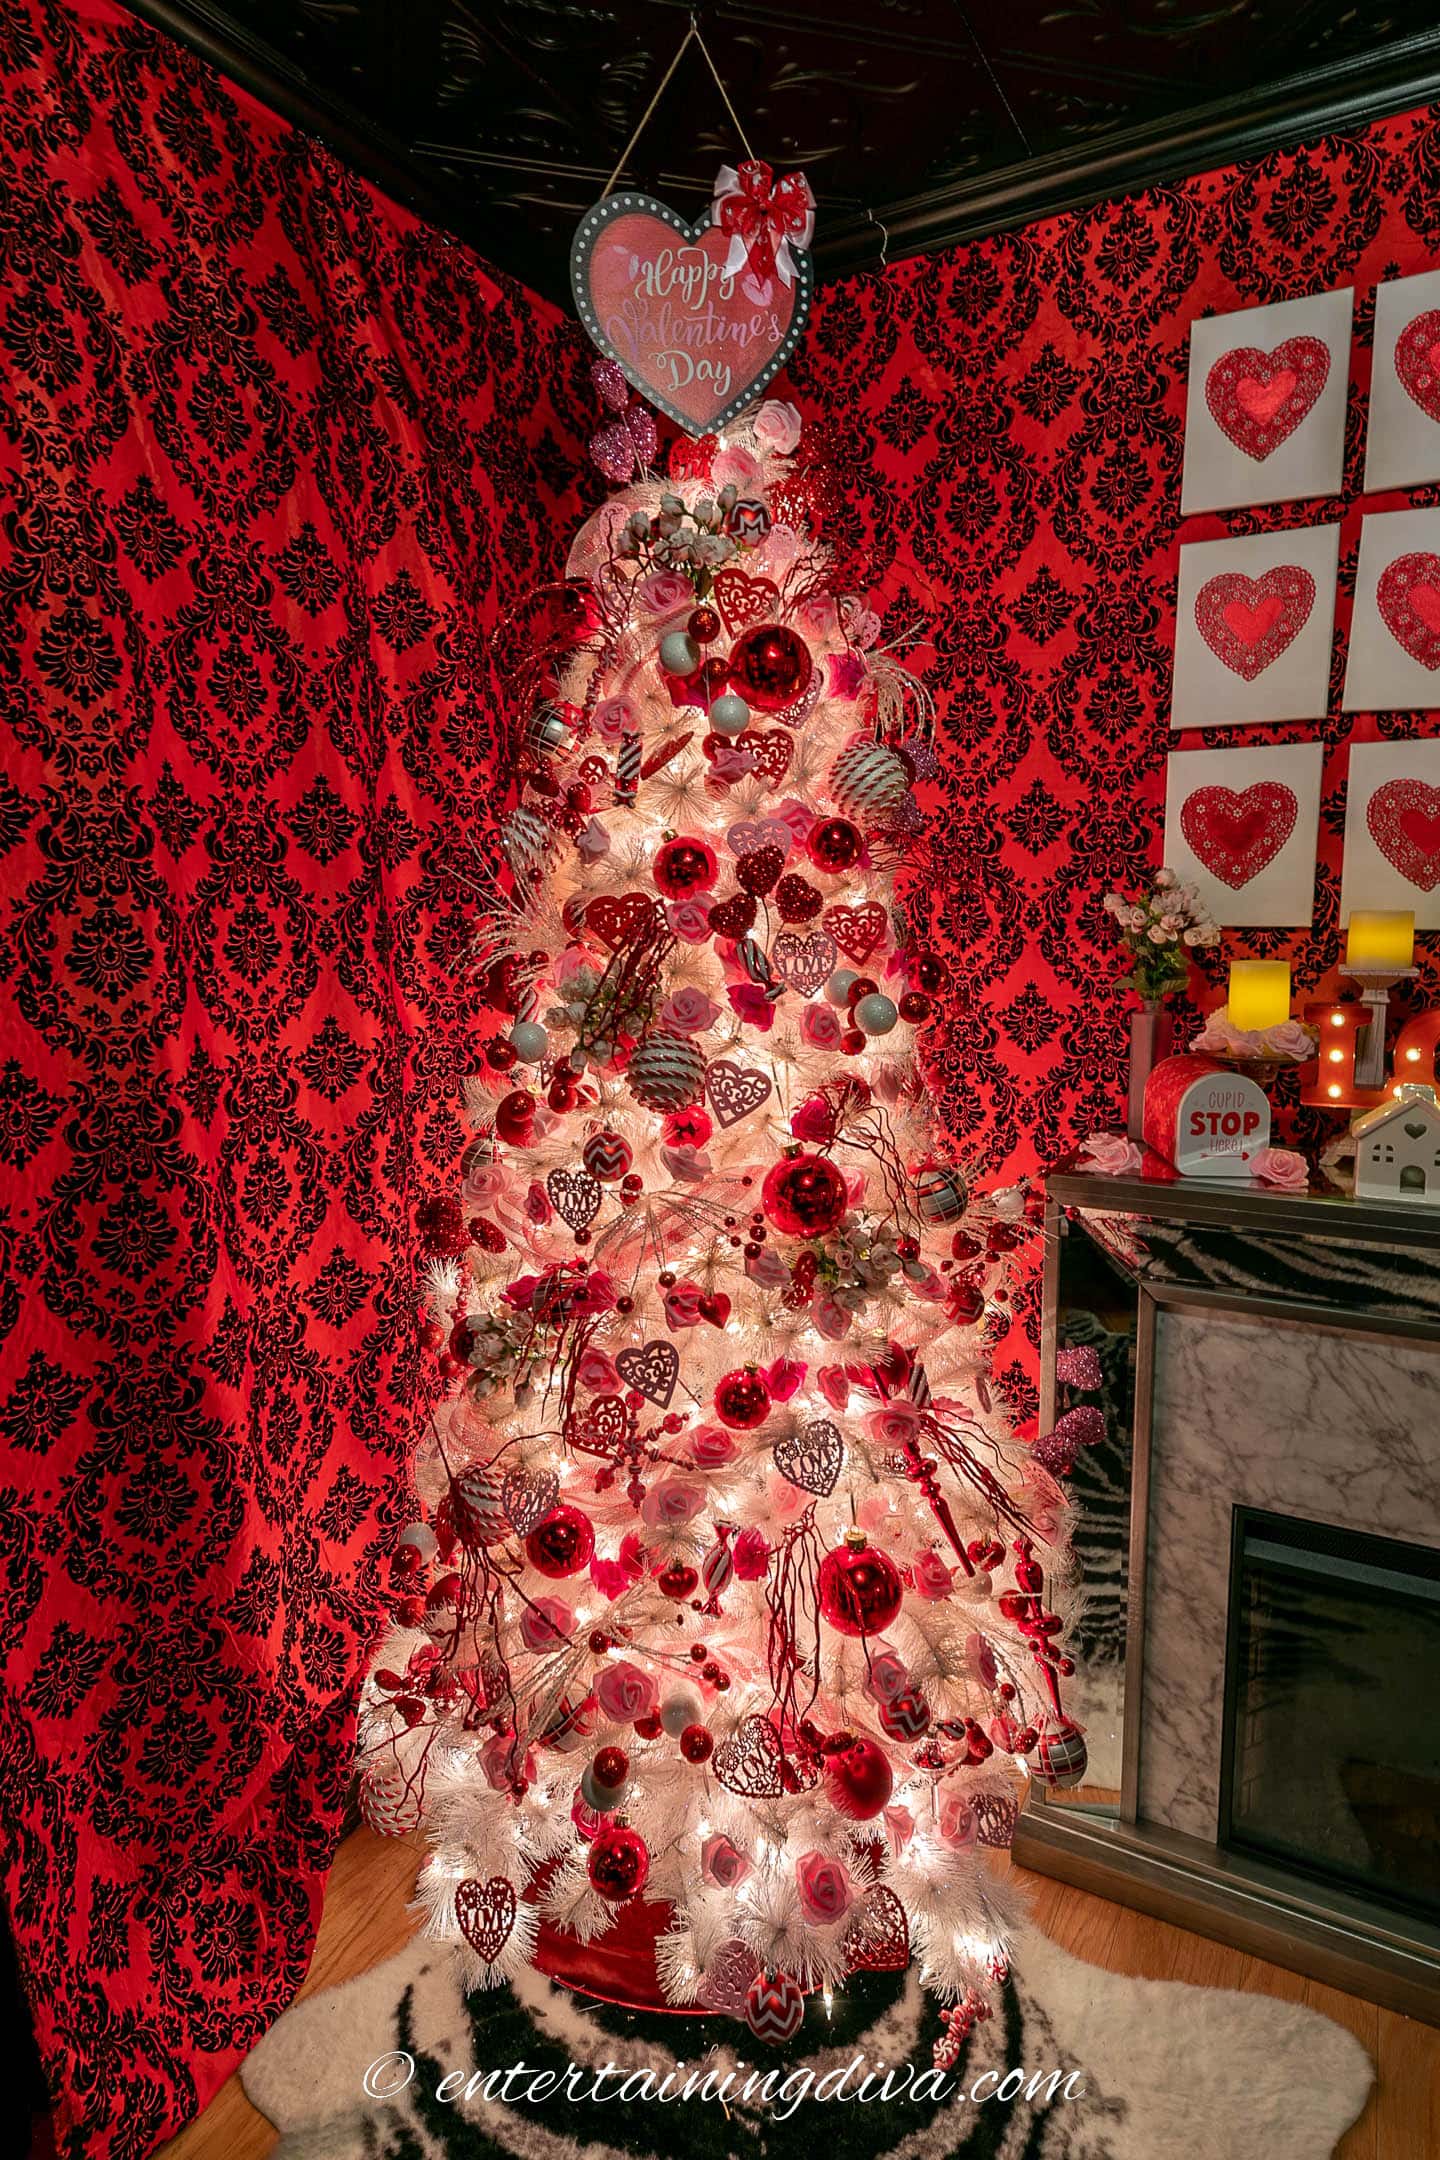 Pink, red and white Valentine tree in front of a red and black wall